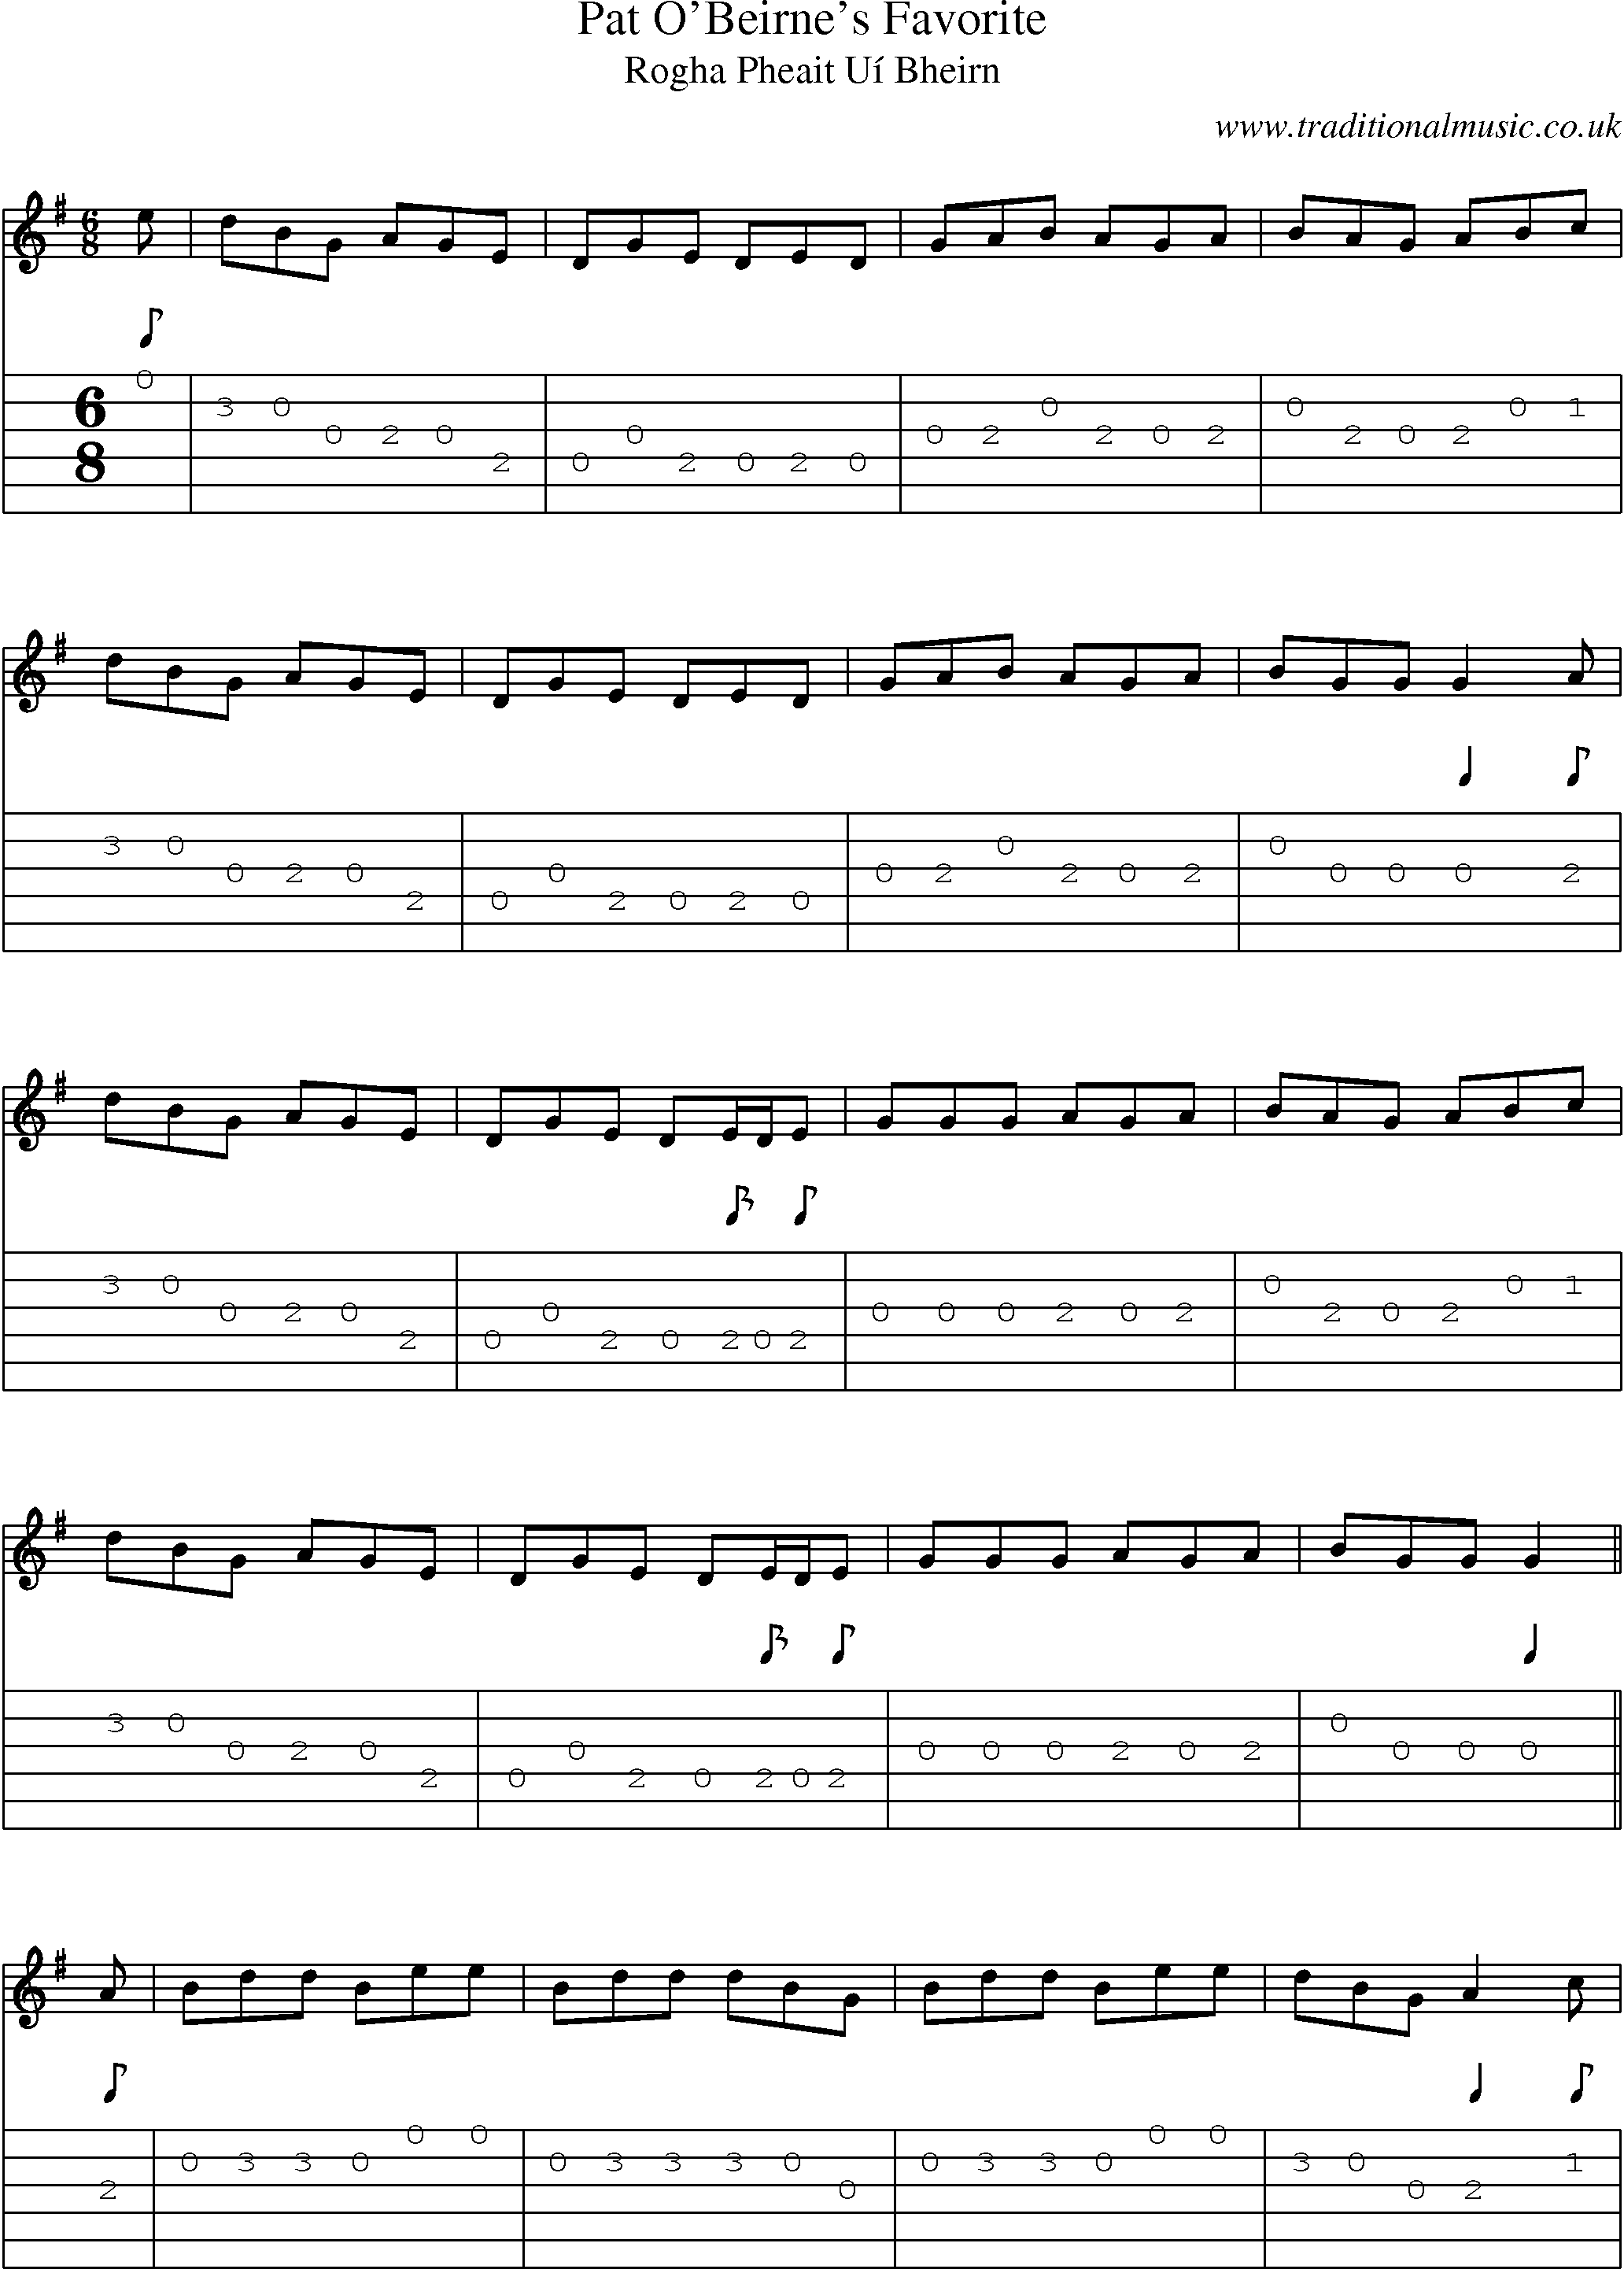 Music Score and Guitar Tabs for Pat Obeirnes Favorite